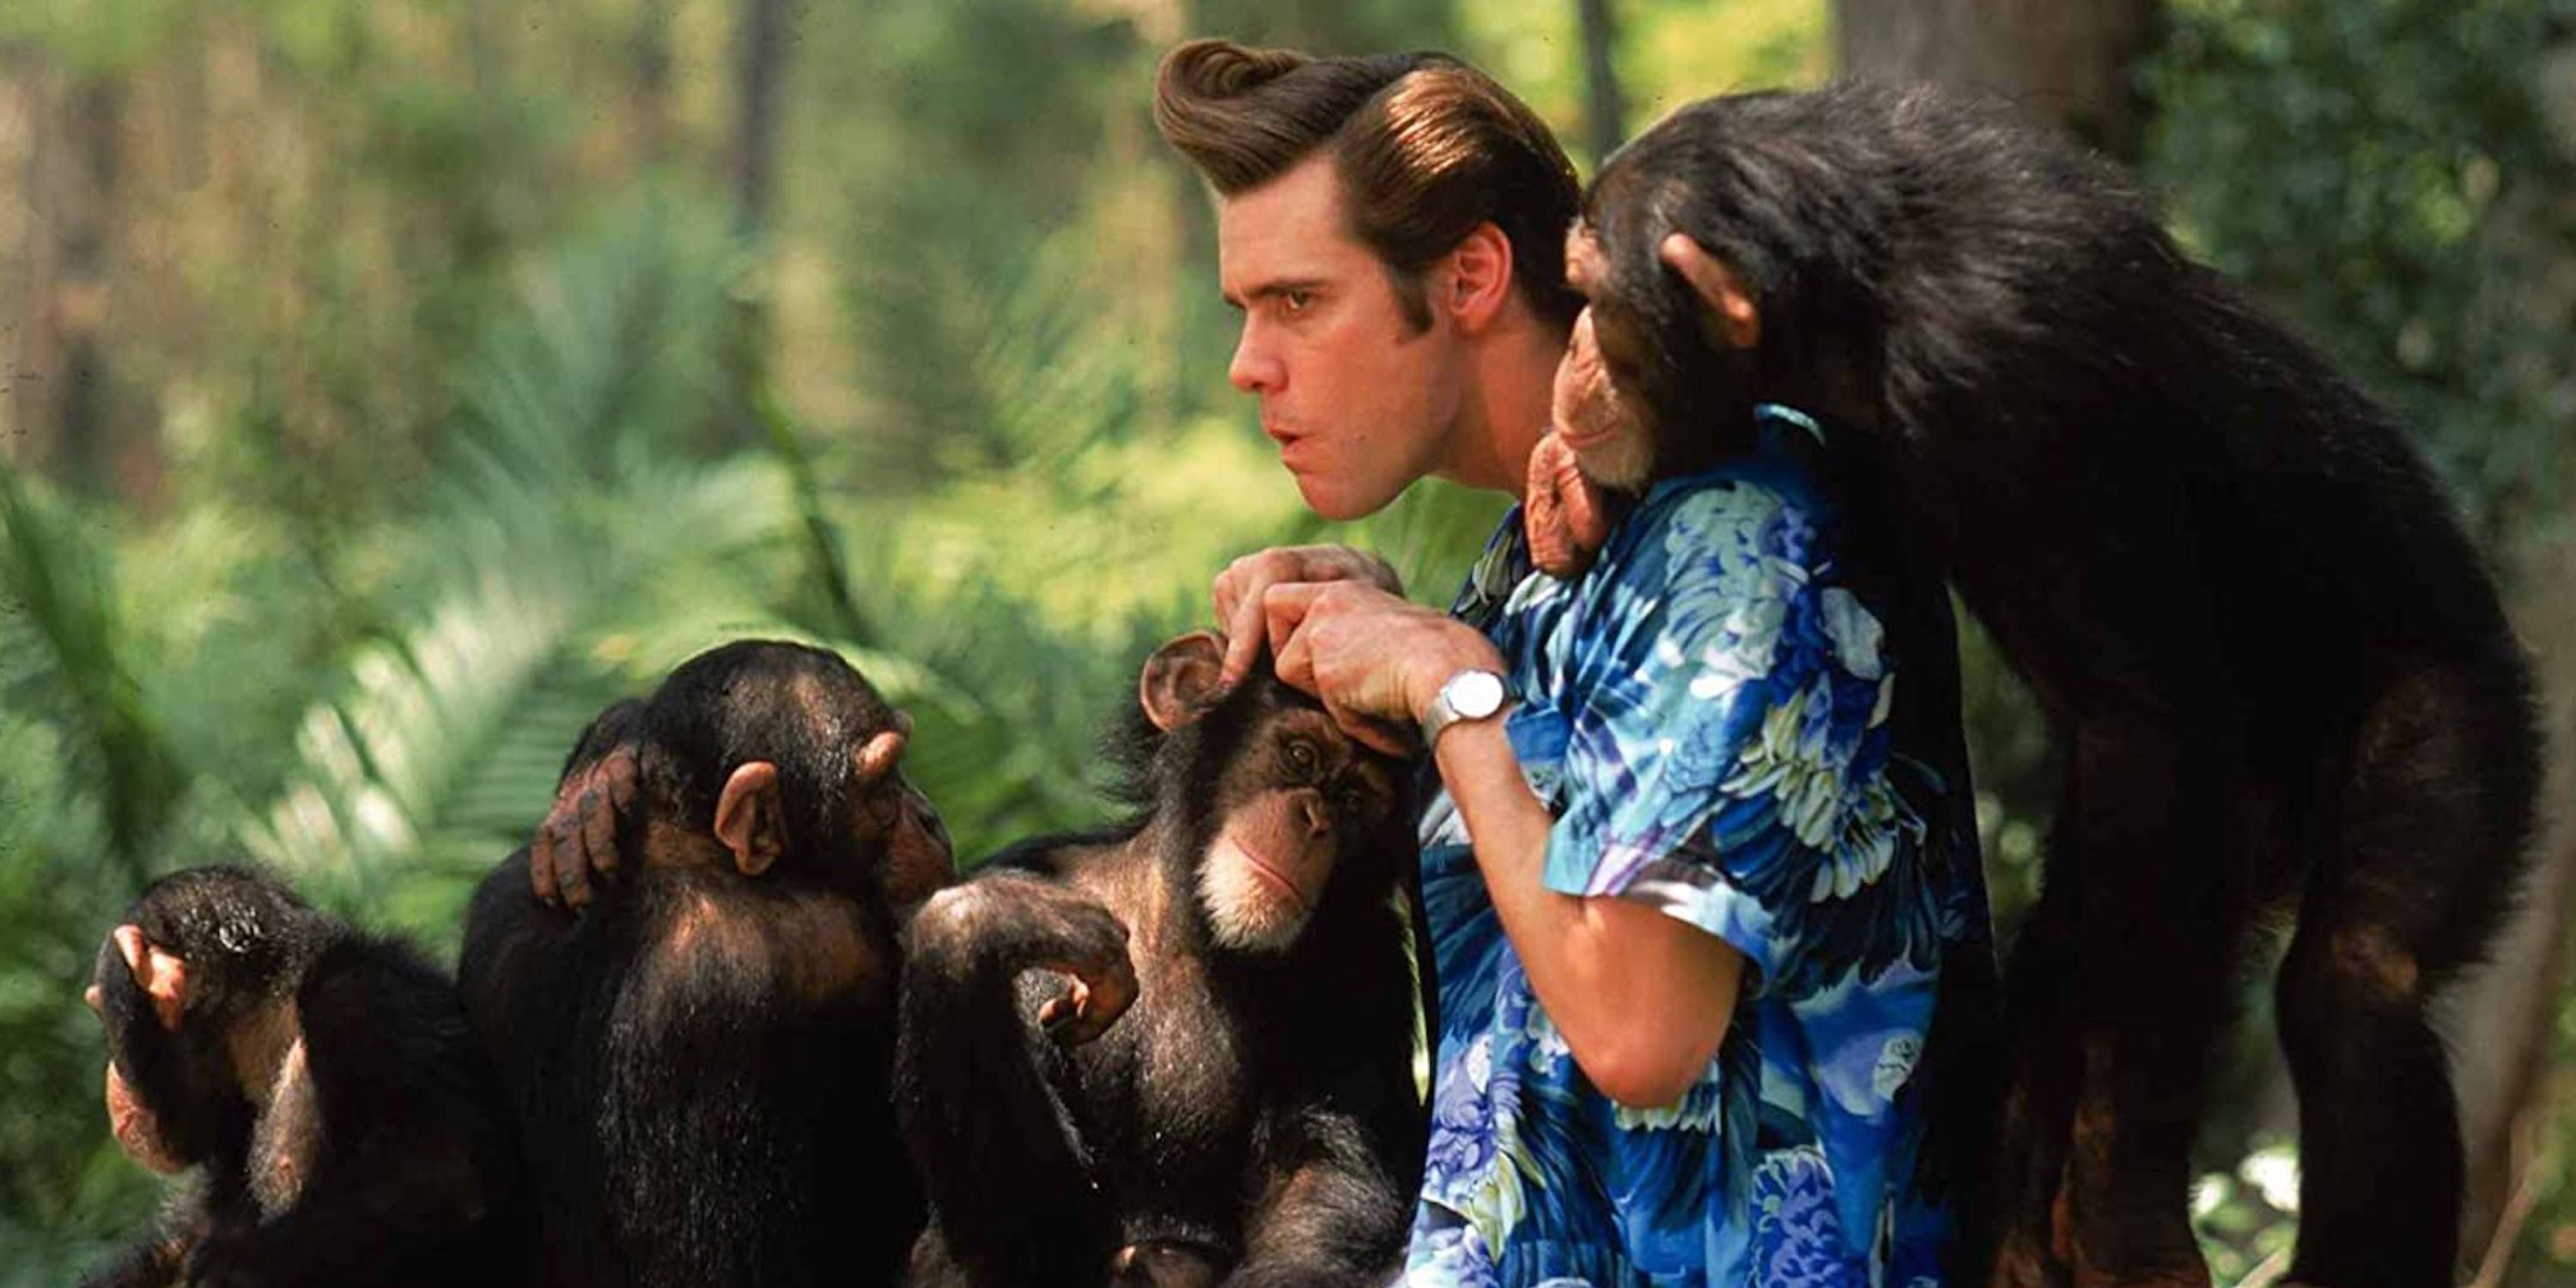 Ace (Jim Carrey) picking apes' heads in Ace Ventura: When Nature Calls